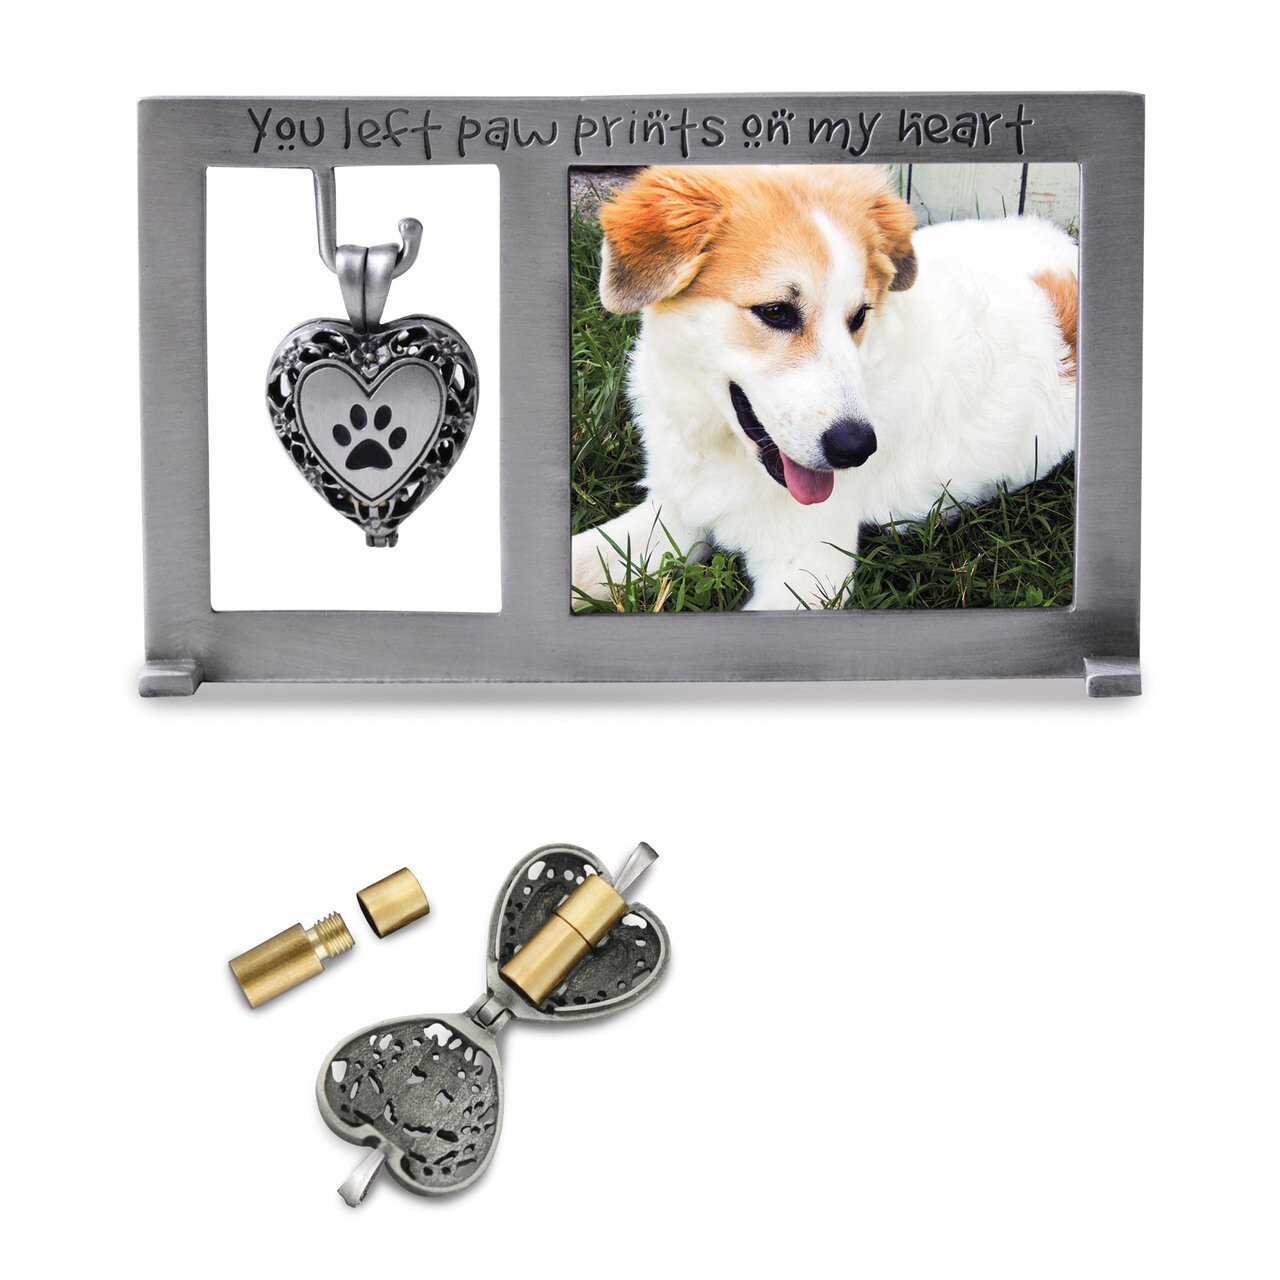 Pet Memorial Ash Holder Locket 3 x 5 Inch Photo Picture Frame Silver-tone GM17432